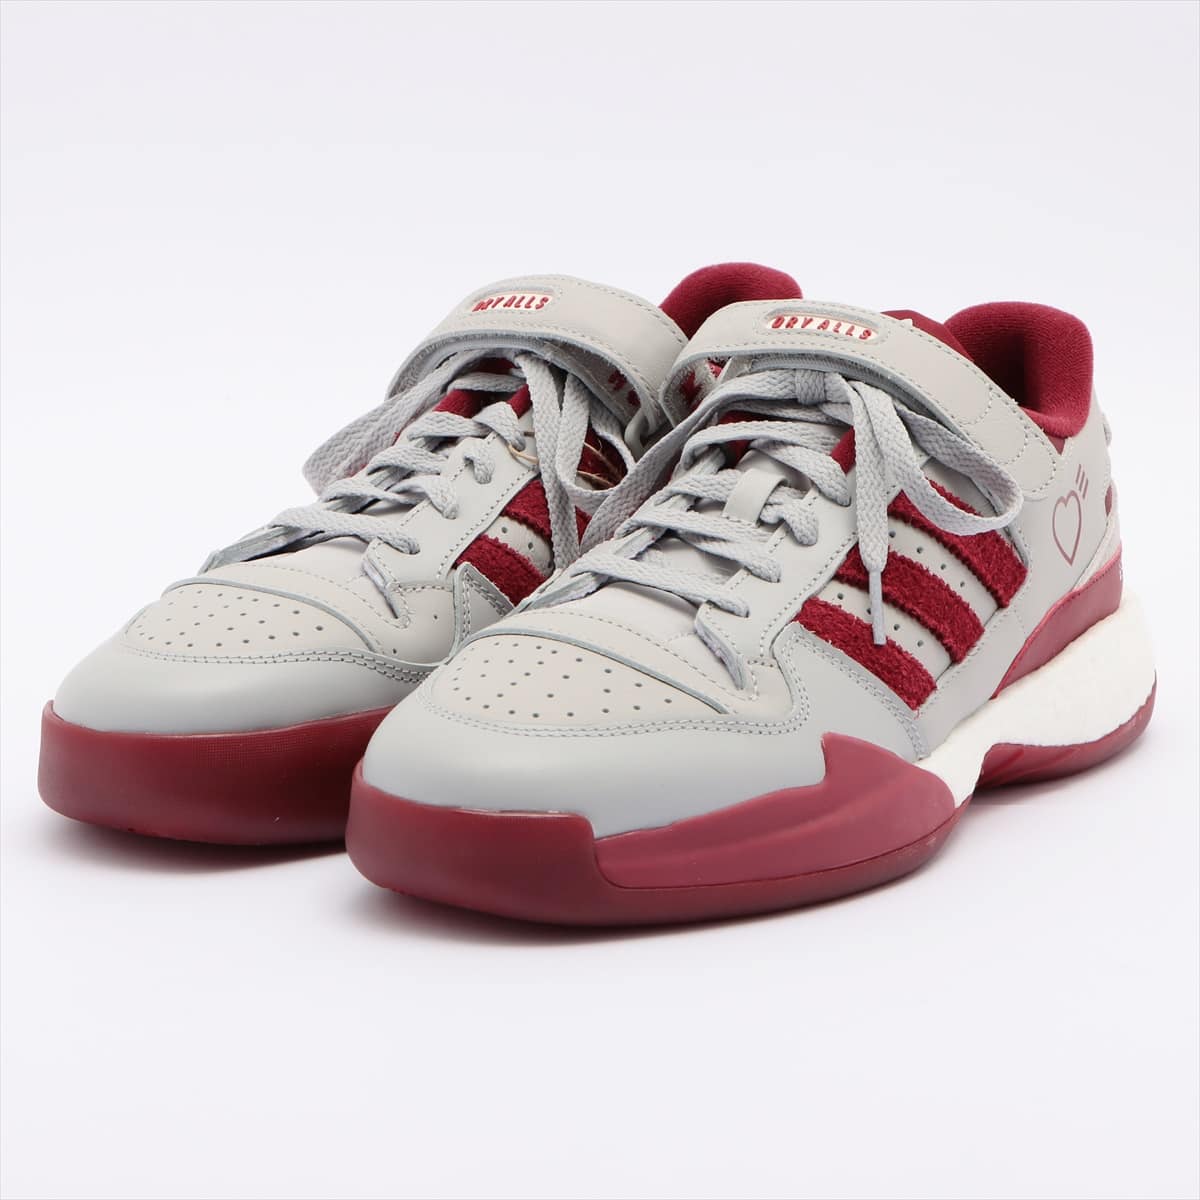 adidas x Human Made Leather Sneakers 27.5cm Men's Gray x red CONSORTIUM FORUM LOW S42977